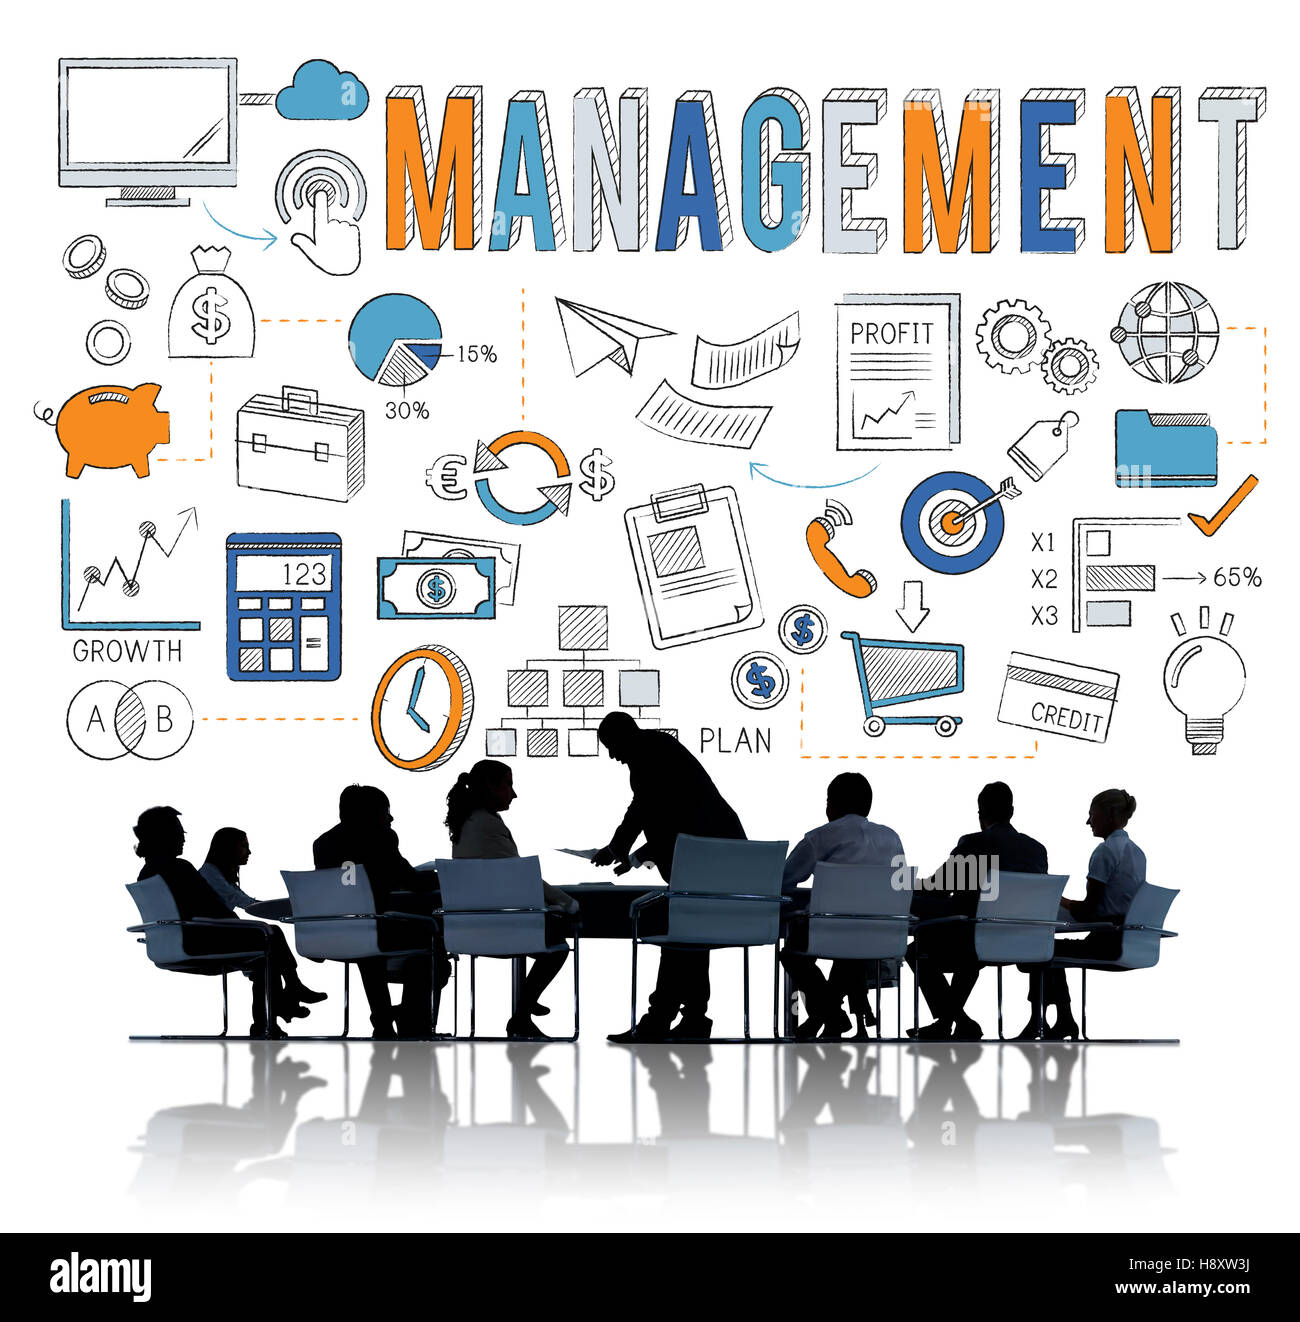 Management Manager Controlling Leadership Concept Stock Photo - Alamy